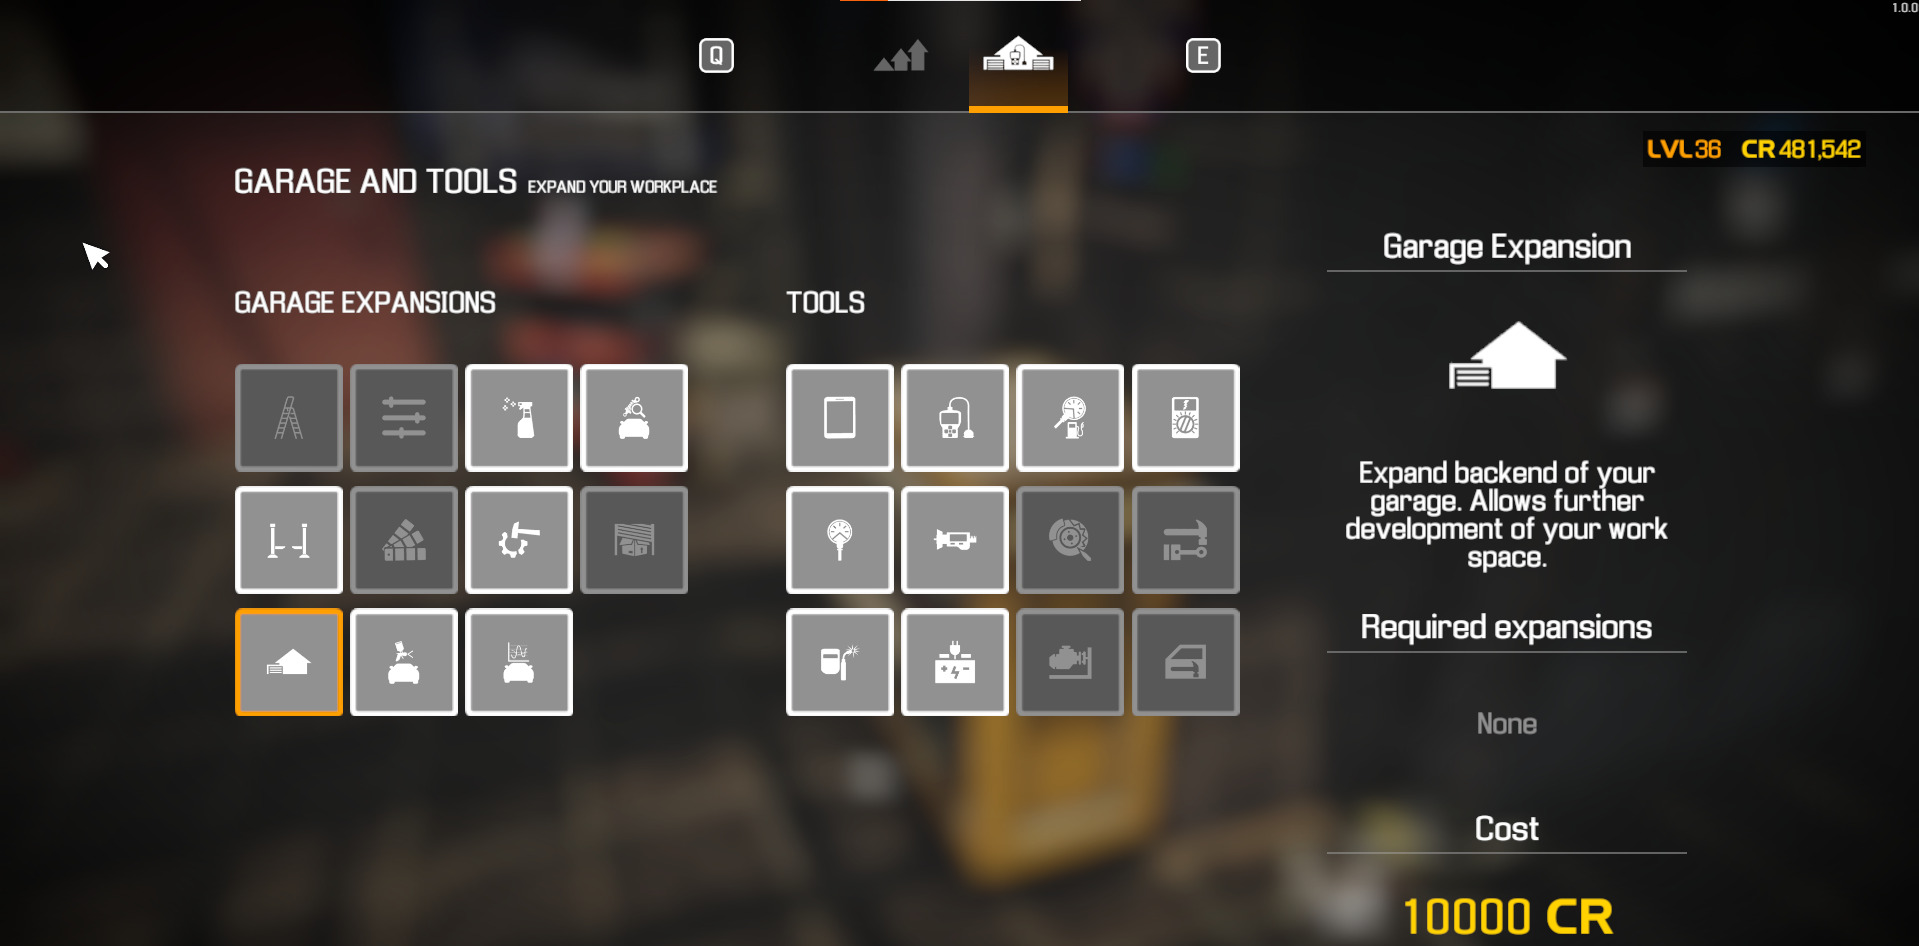 You have to purchase the Garage Expansion upgrade to gain access to the body repair table in Car Mechanic Simulator. 